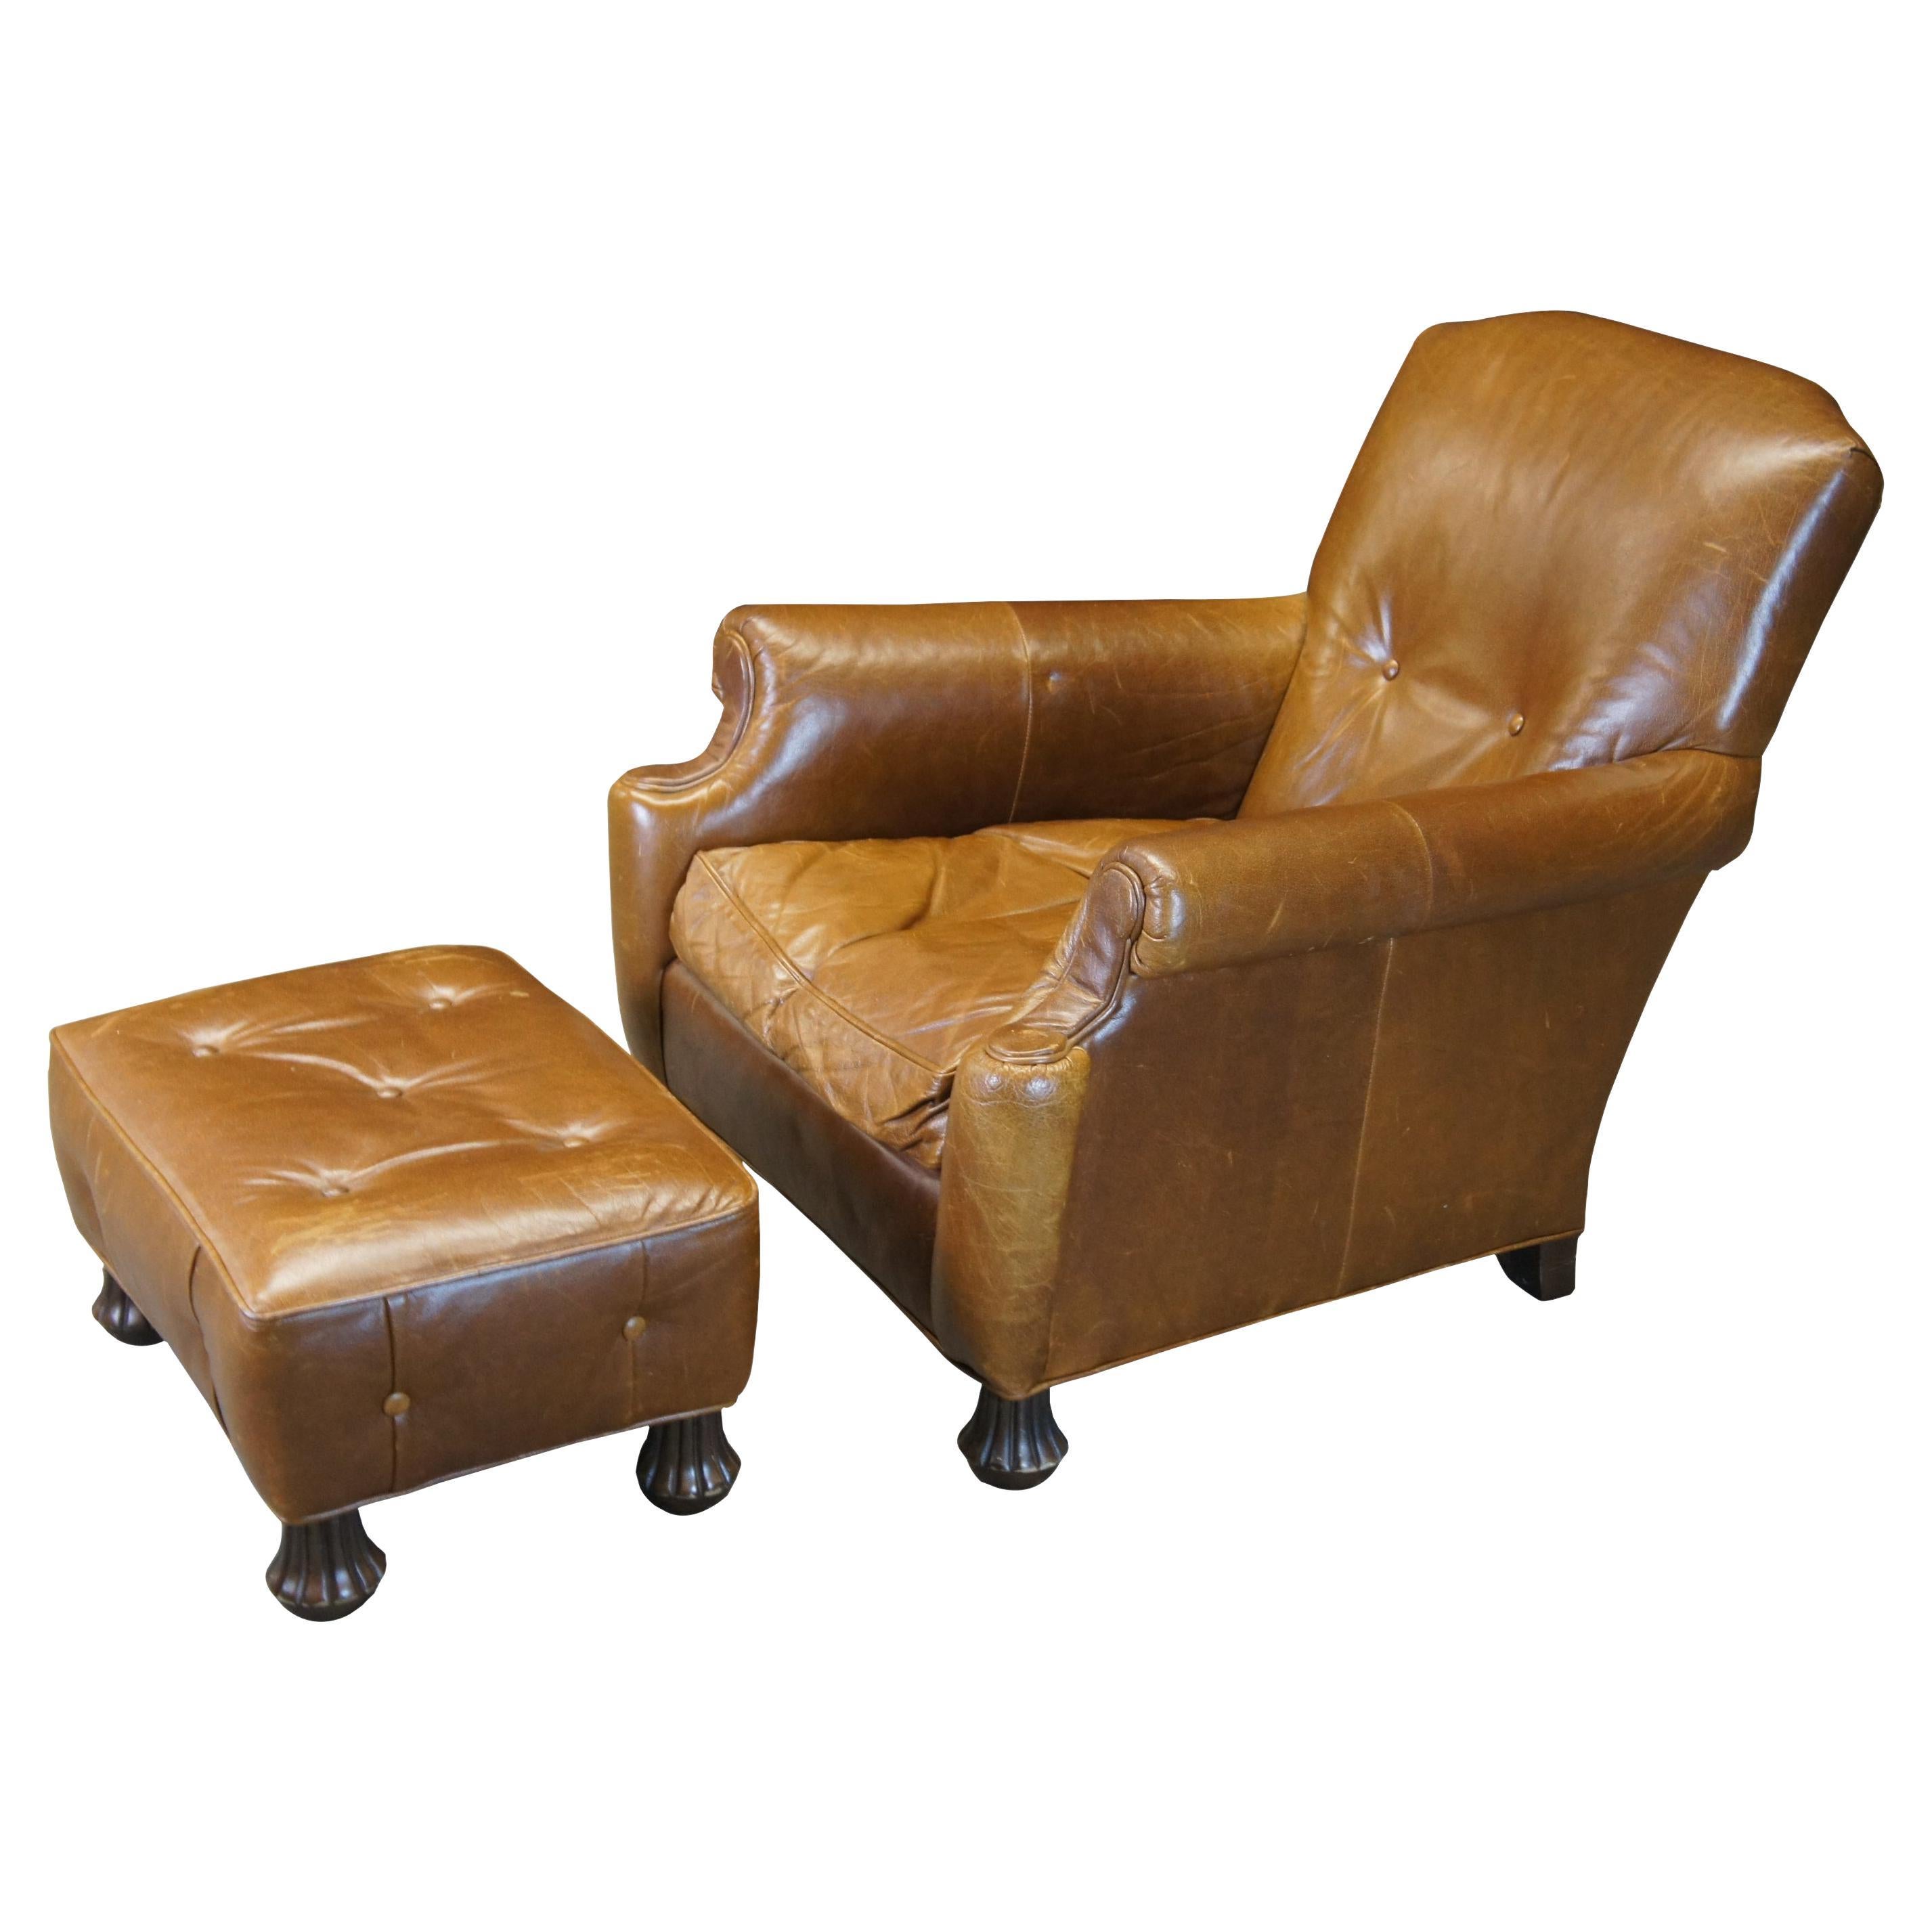 William Alan Traditional Brown Leather Tufted Club Chair & Ottoman Down Filled